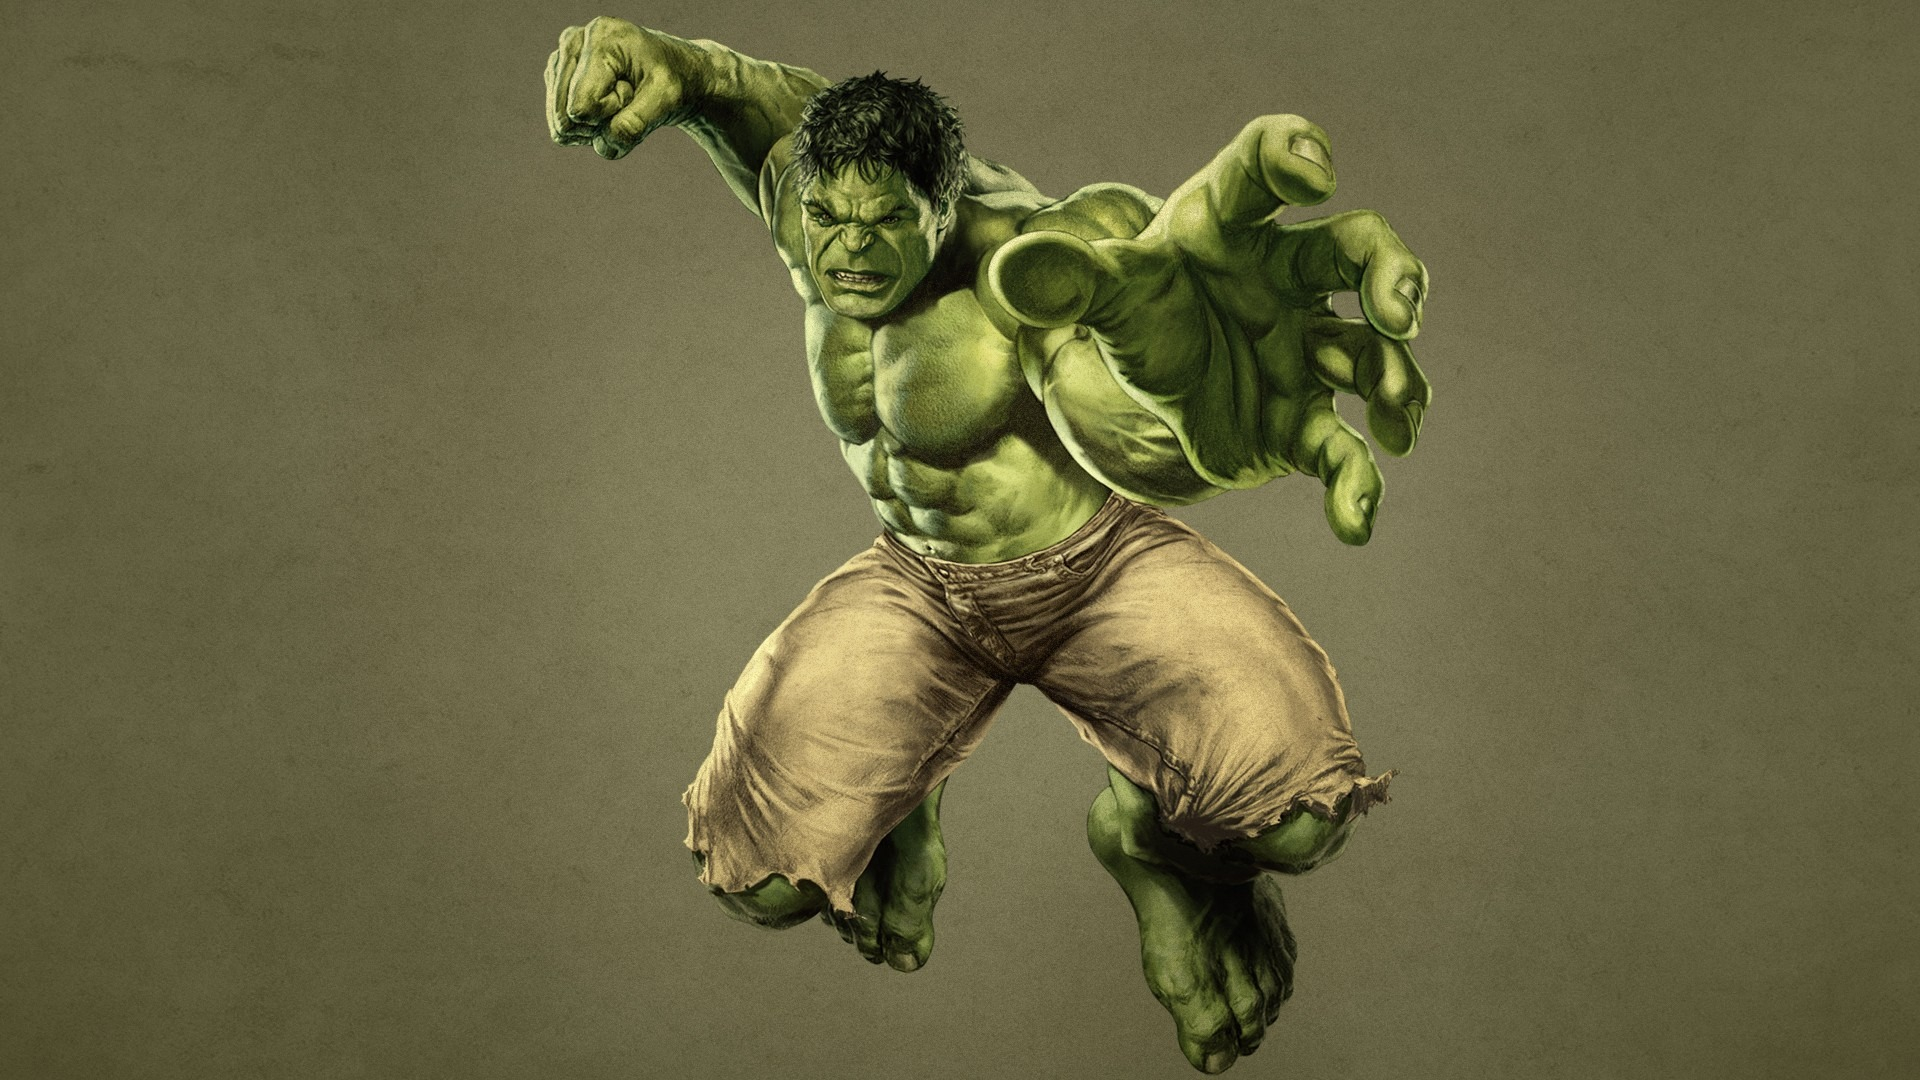 1920x1080 240+ Hulk HD Wallpapers and Backgrounds